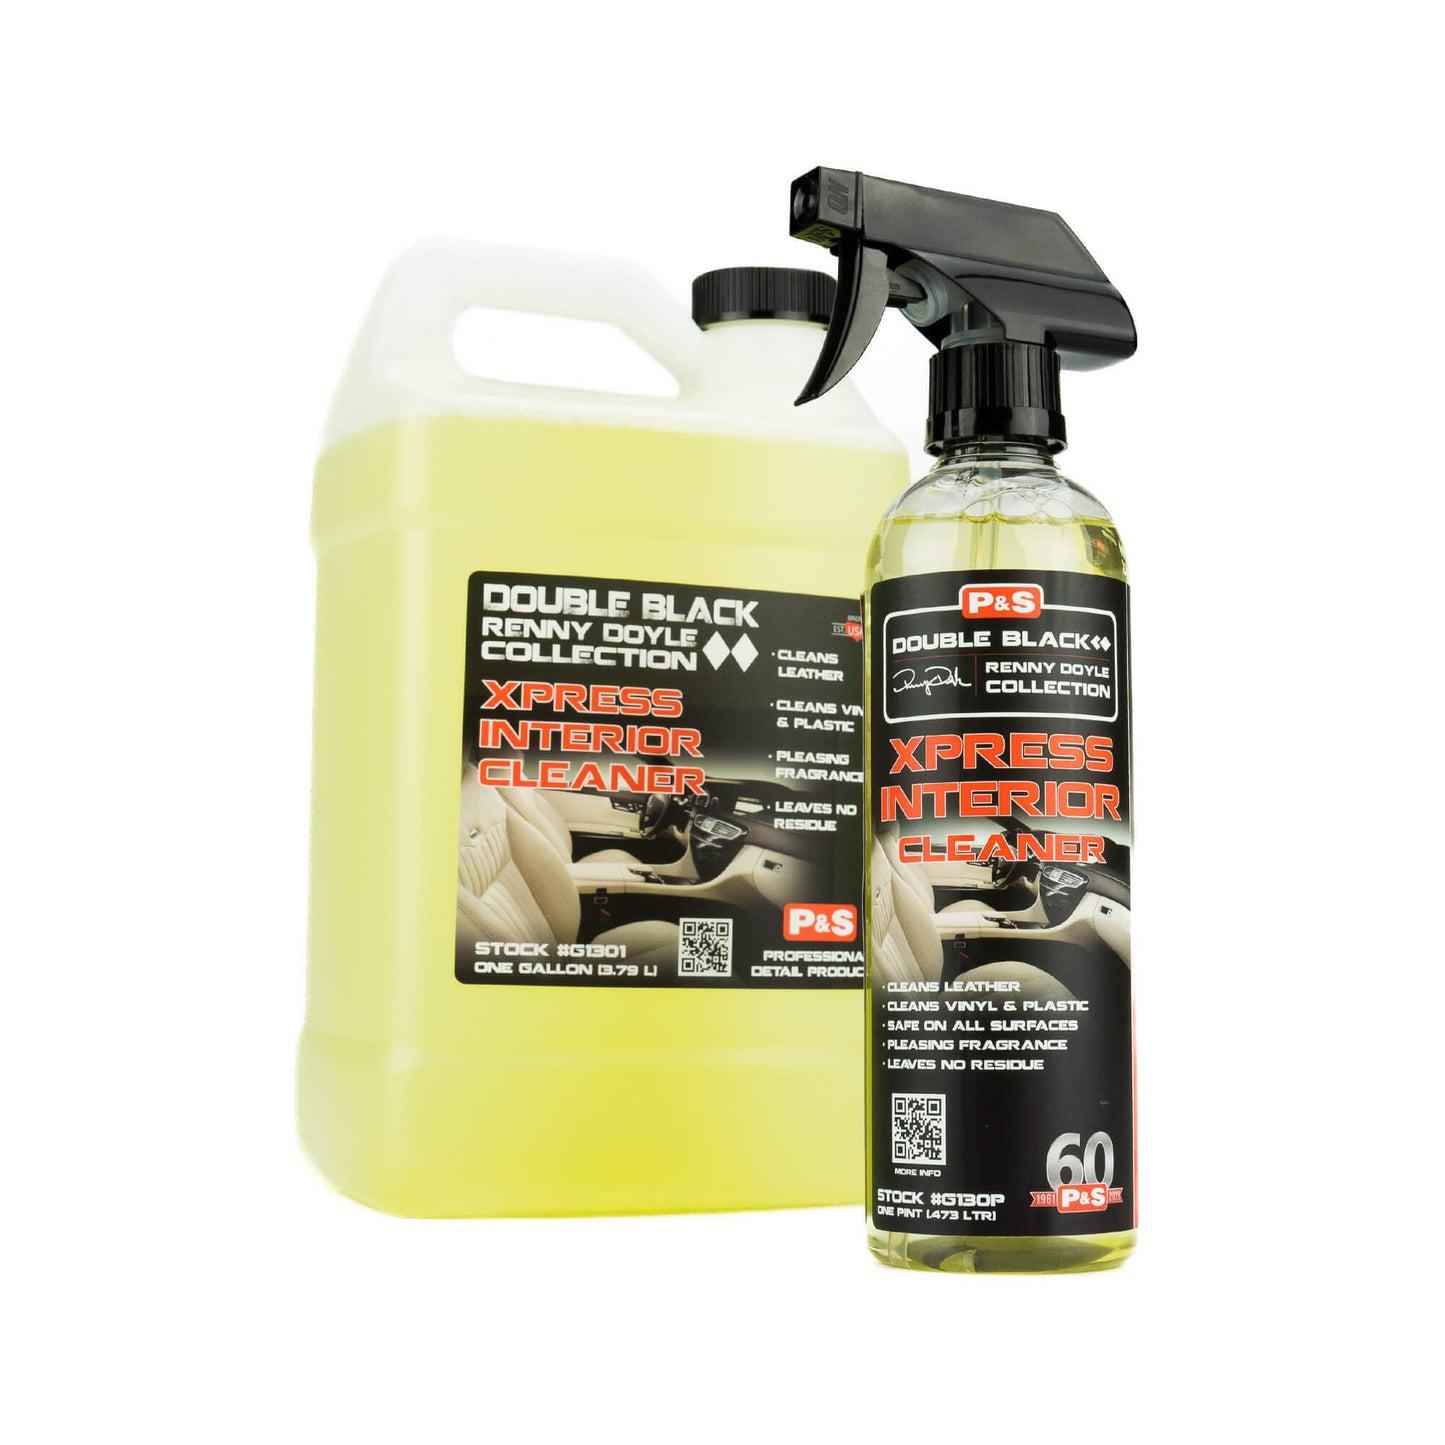 P&S Xpress Interior Cleaner - The Best Residue Free Interior